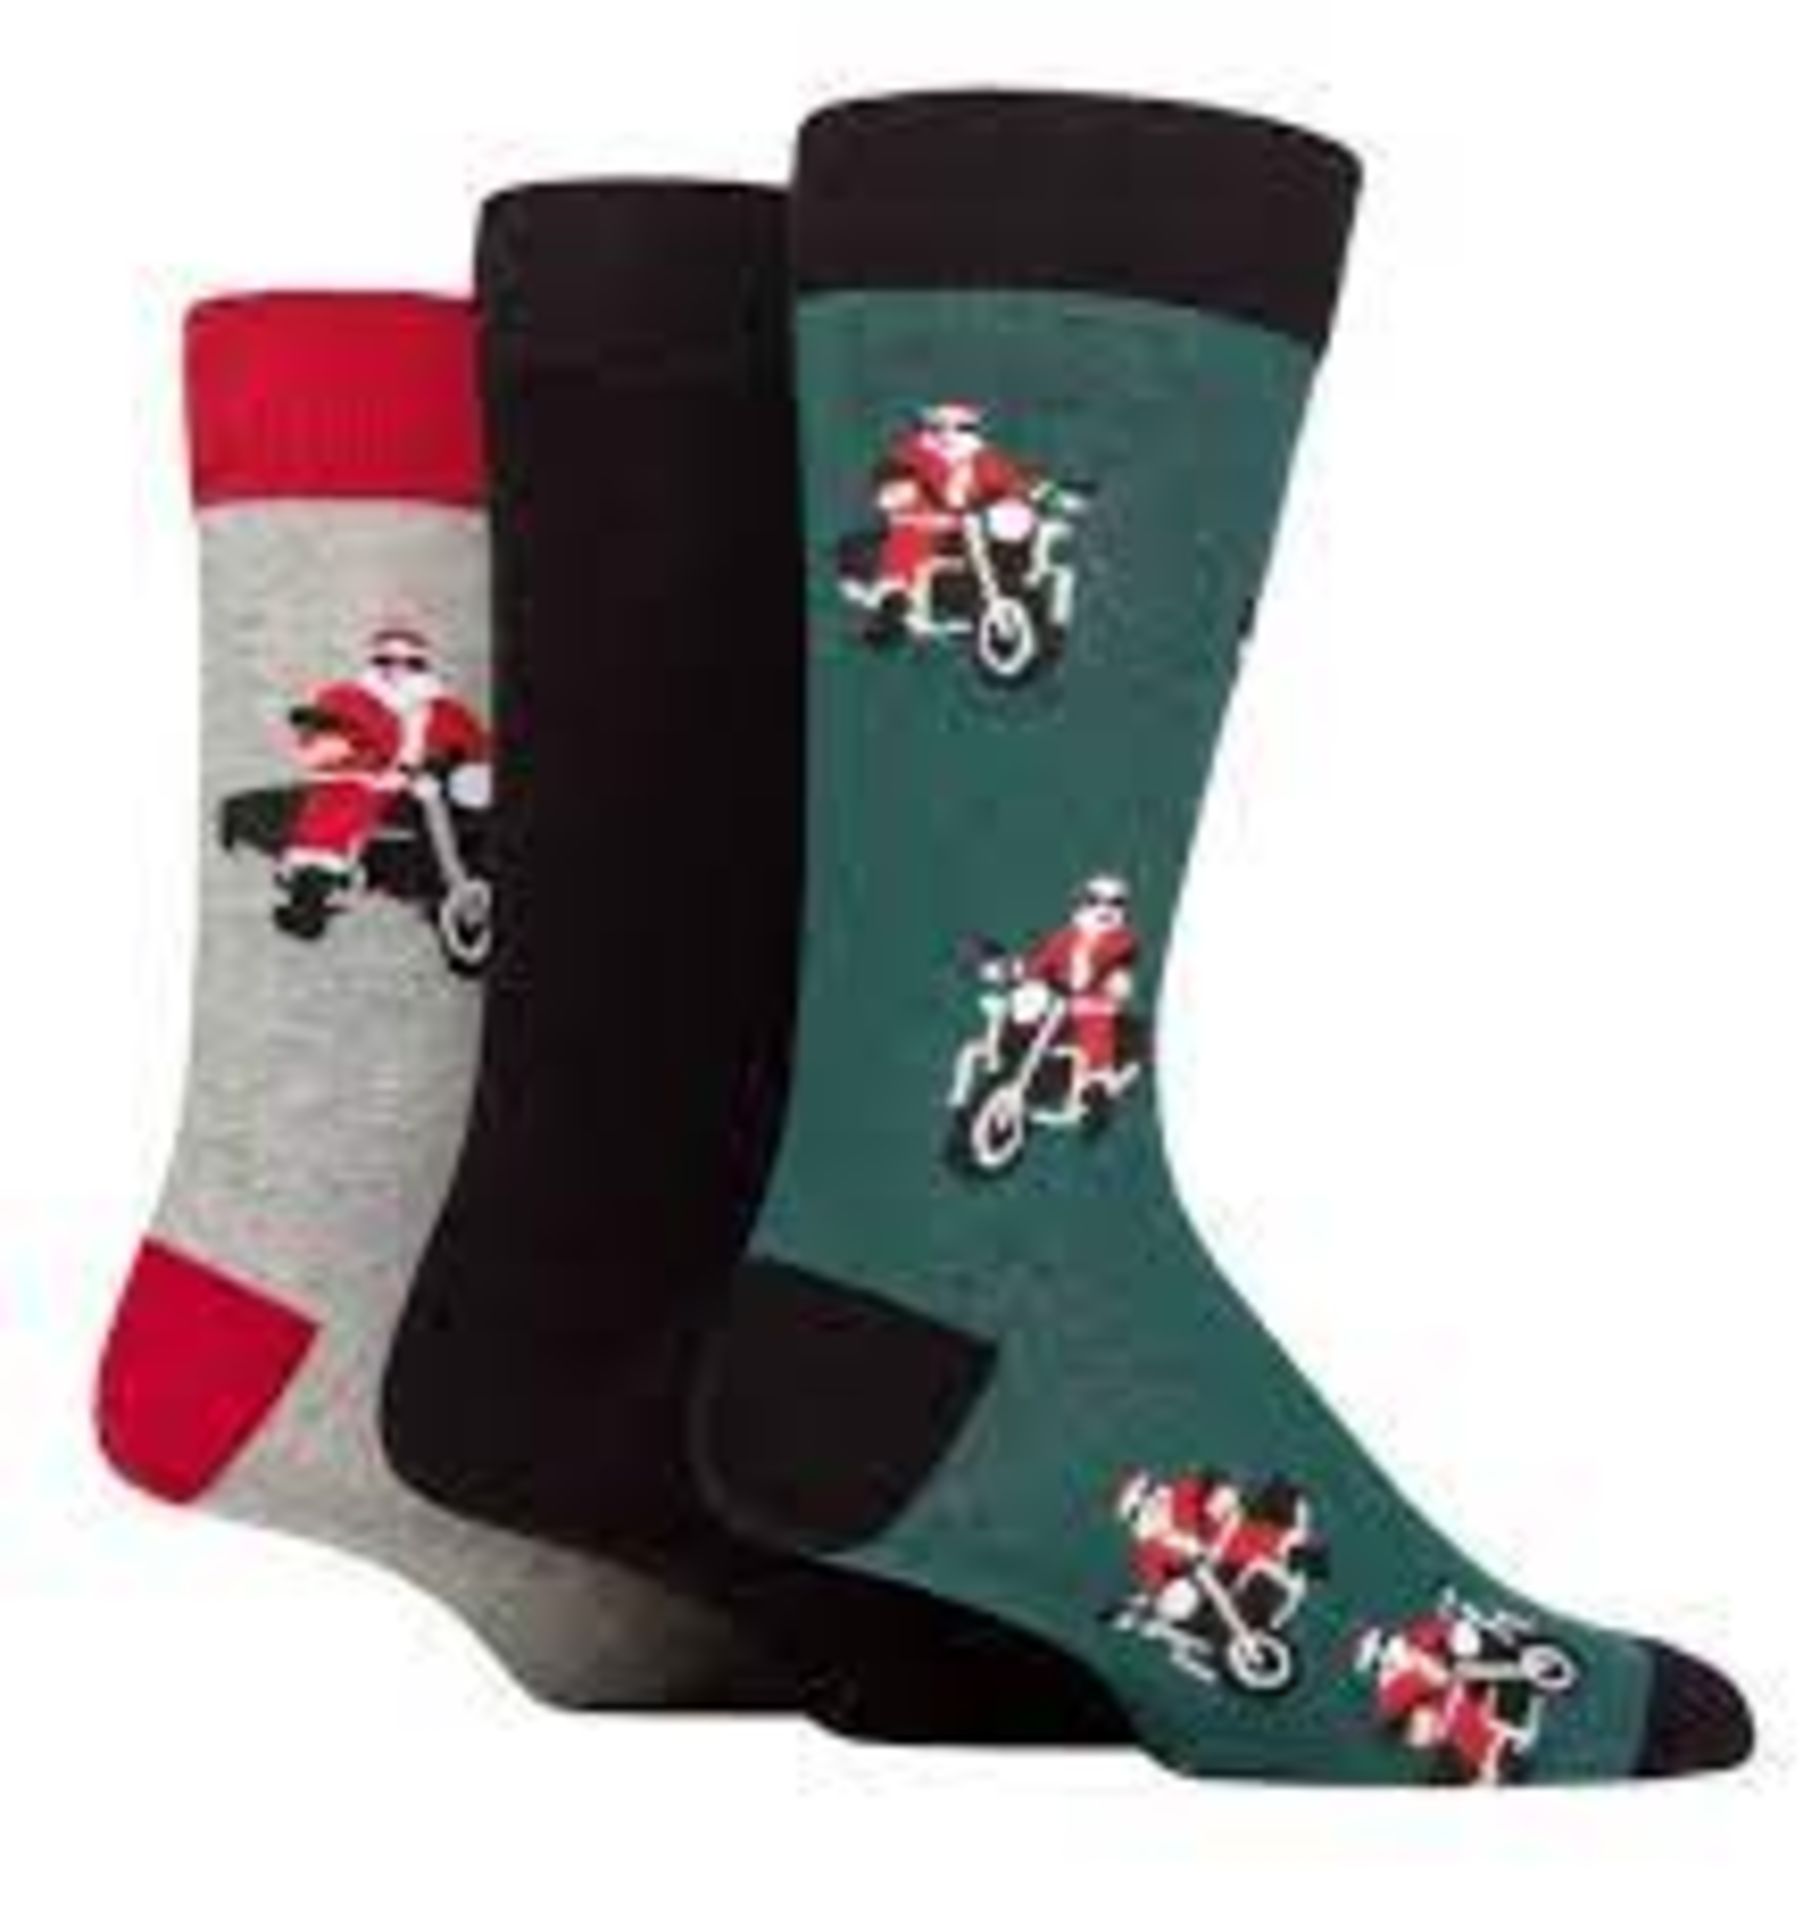 3 Pairs Sock Shop Wild Feet Mens Sock Size 7-11 (Delivery Band A)